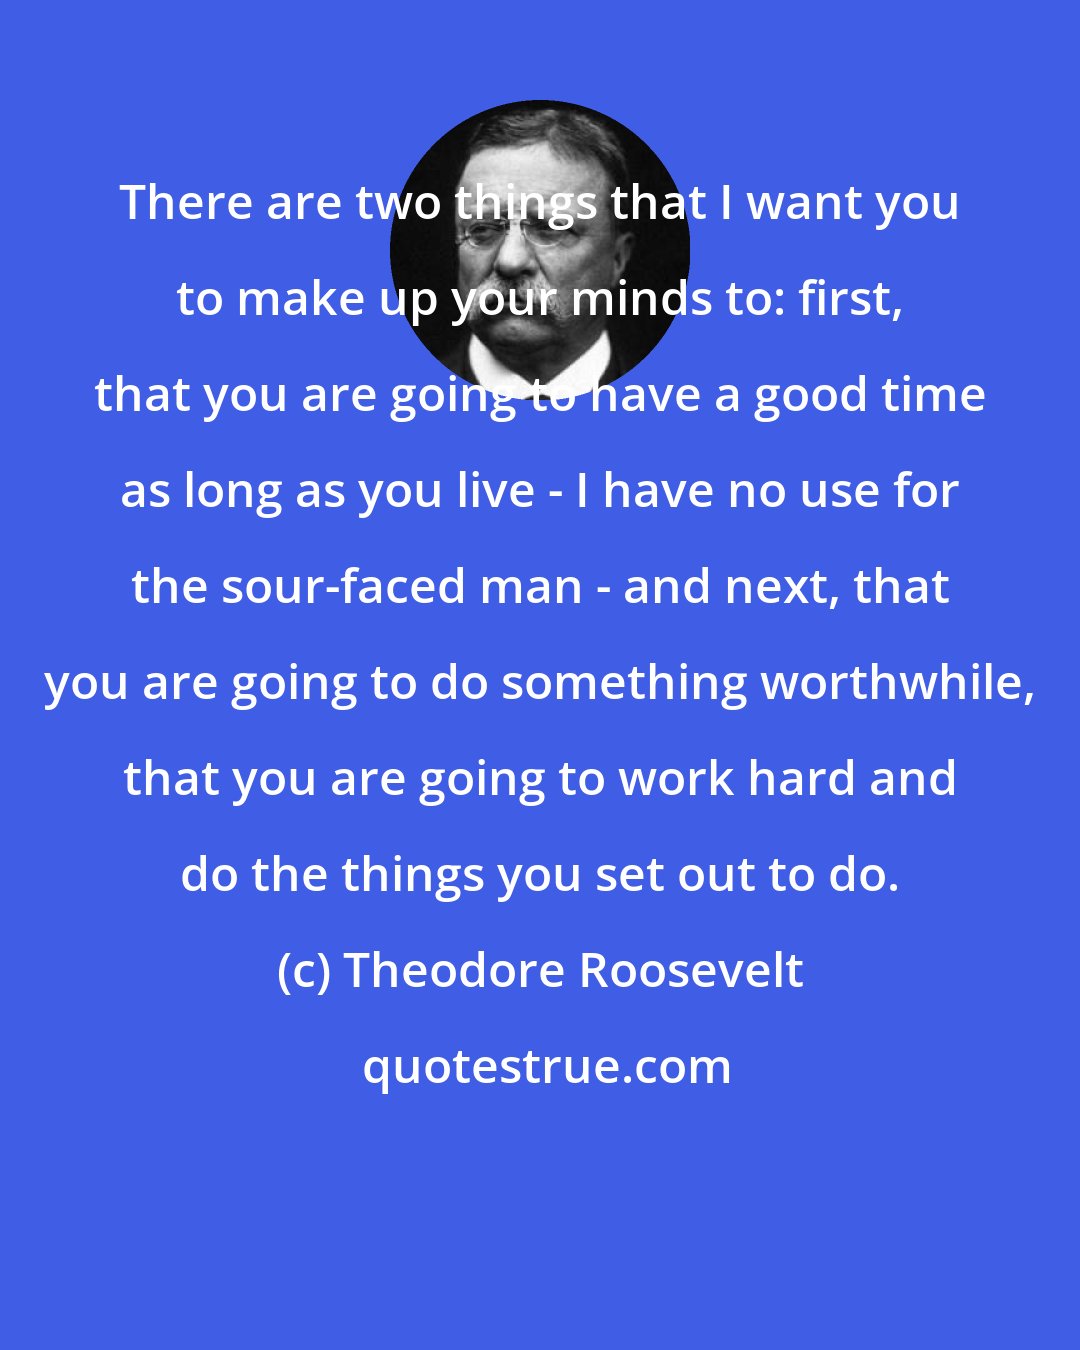 Theodore Roosevelt: There are two things that I want you to make up your minds to: first, that you are going to have a good time as long as you live - I have no use for the sour-faced man - and next, that you are going to do something worthwhile, that you are going to work hard and do the things you set out to do.